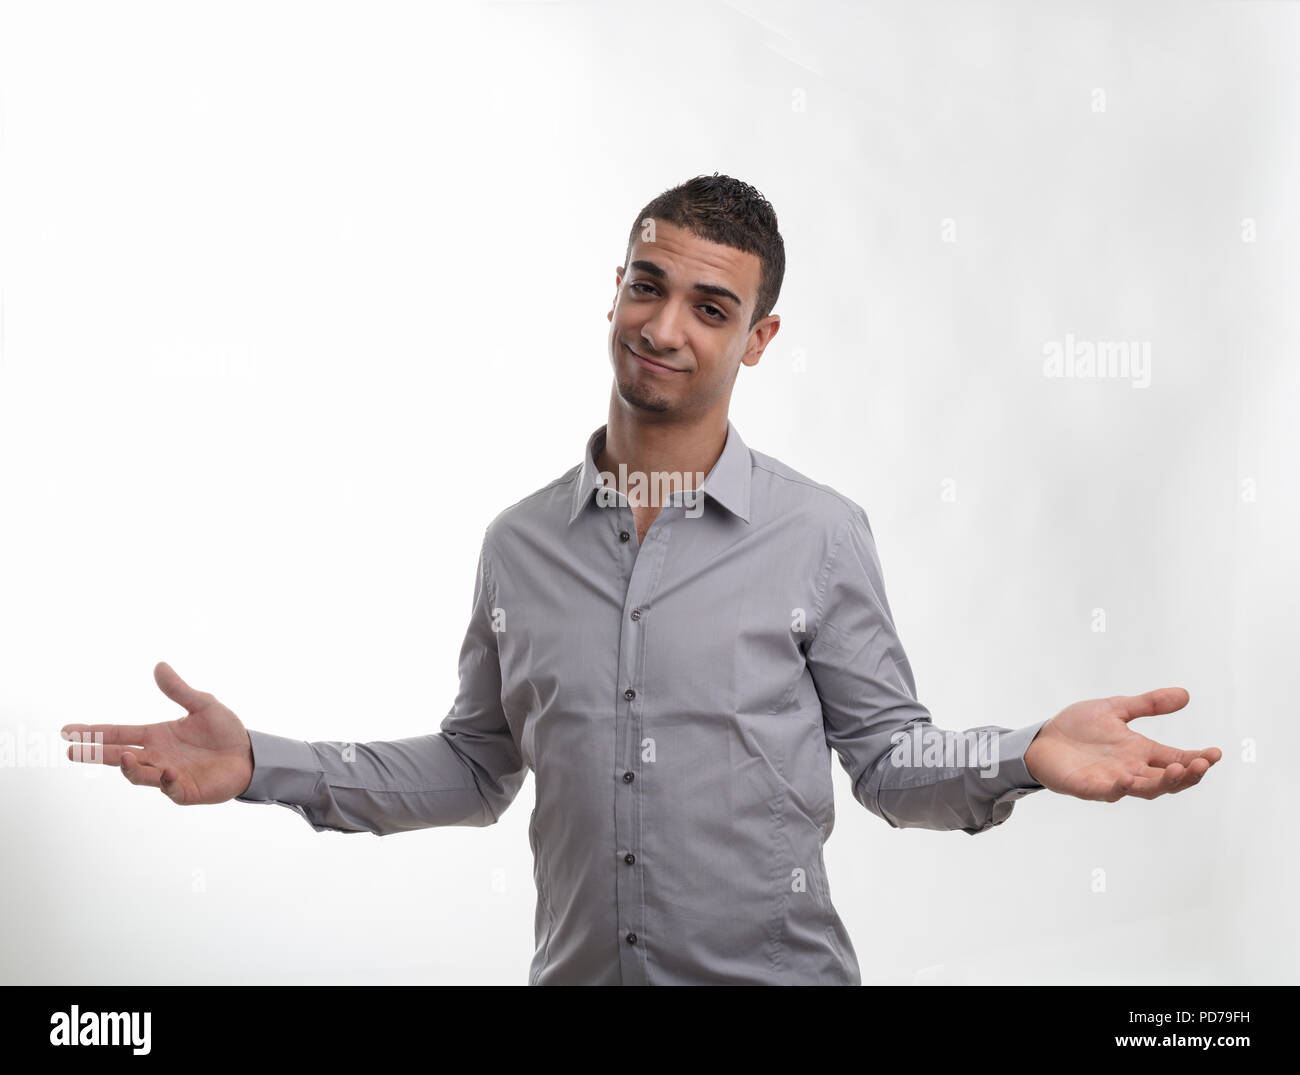 Charismatic man shrugging his shoulders with outstretched arms and a wry smile isolated on white Stock Photo